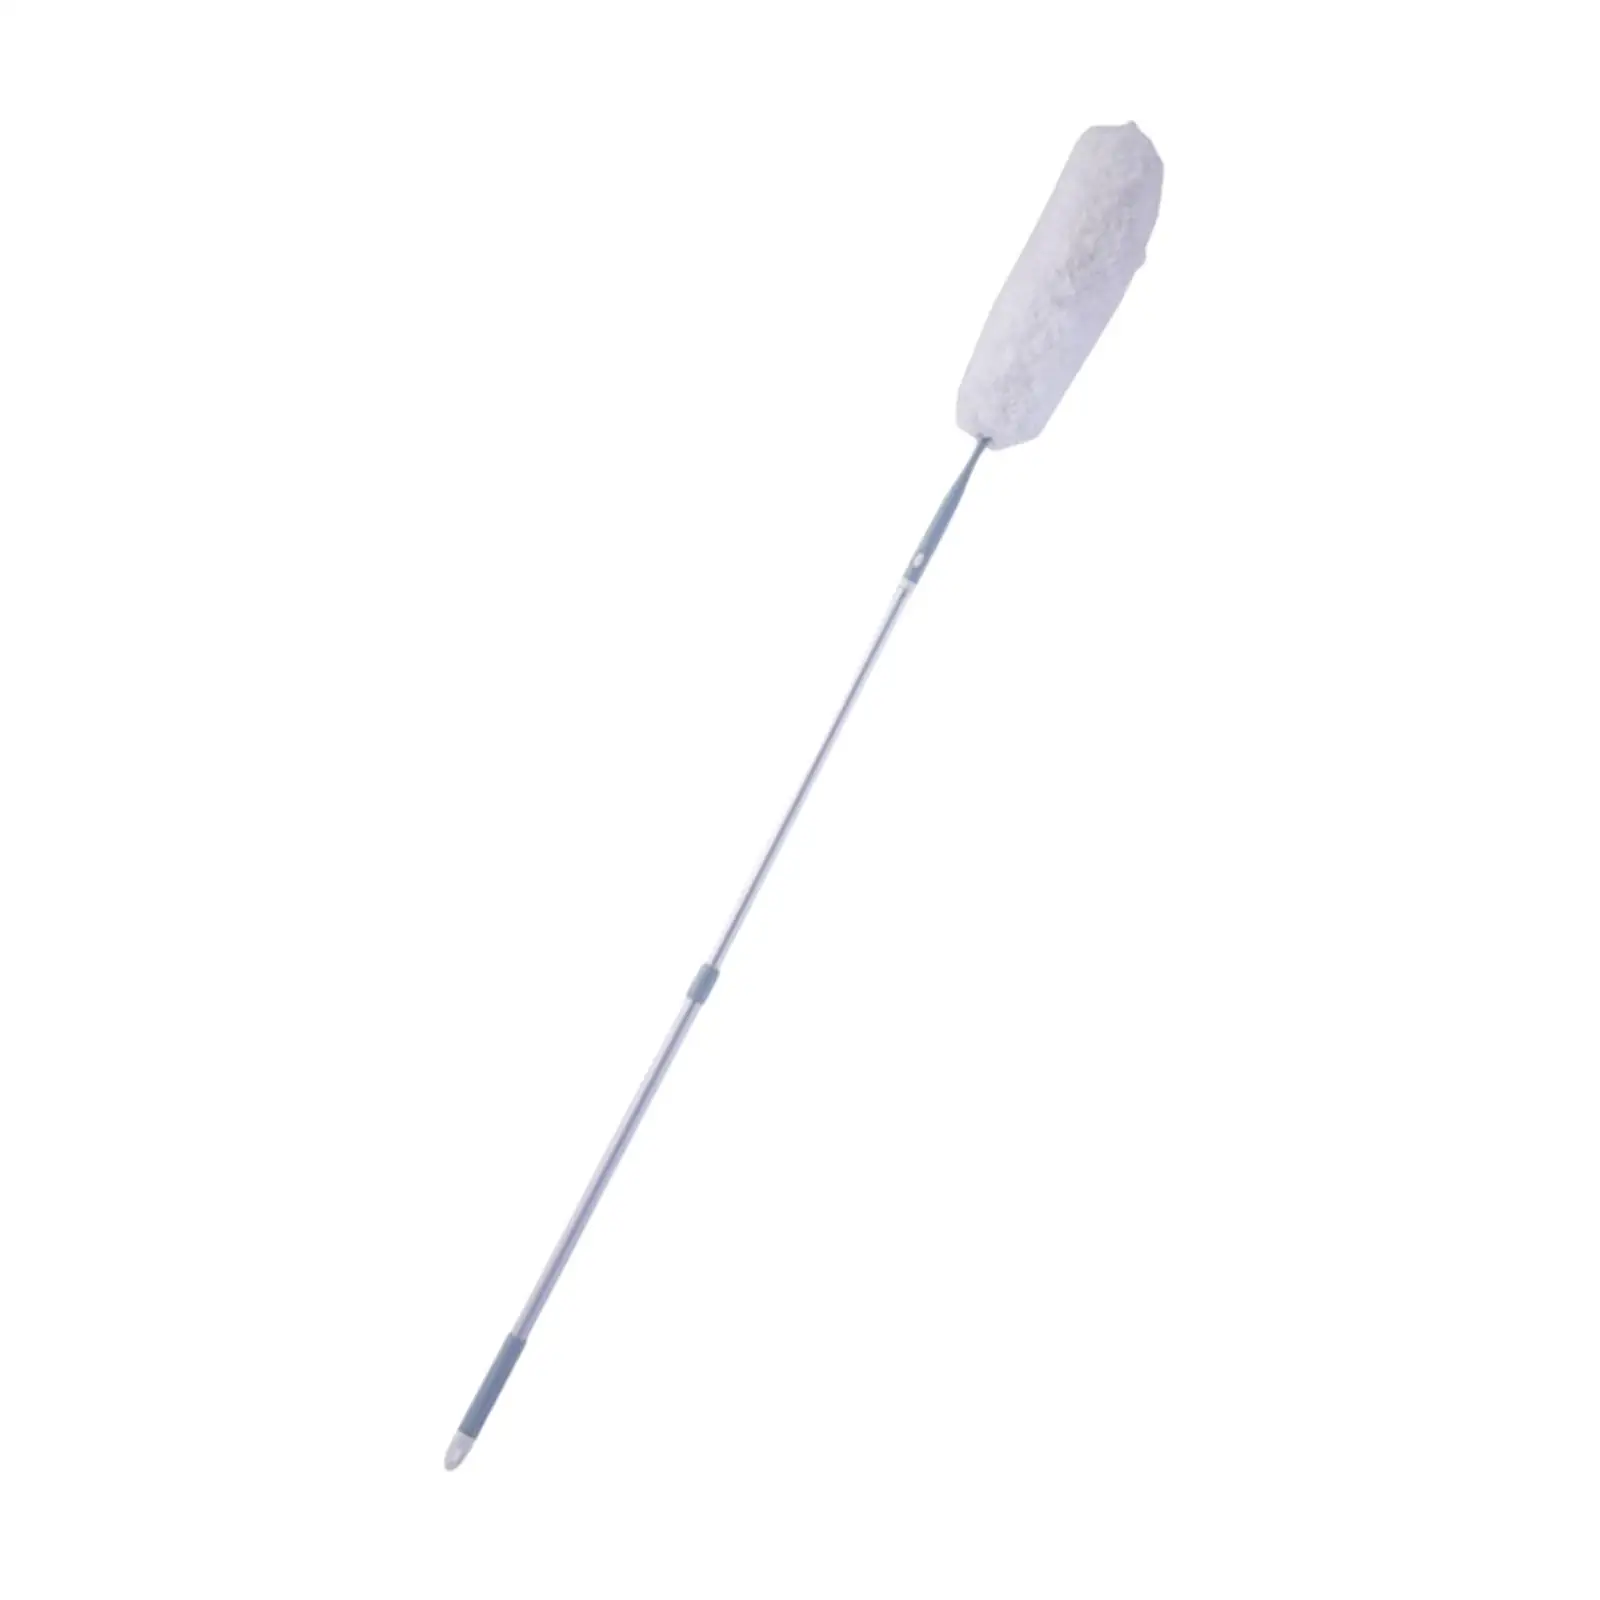 Microfiber Duster with Extension Pole Long Handle Dusters for Blinds Furniture Cleaning